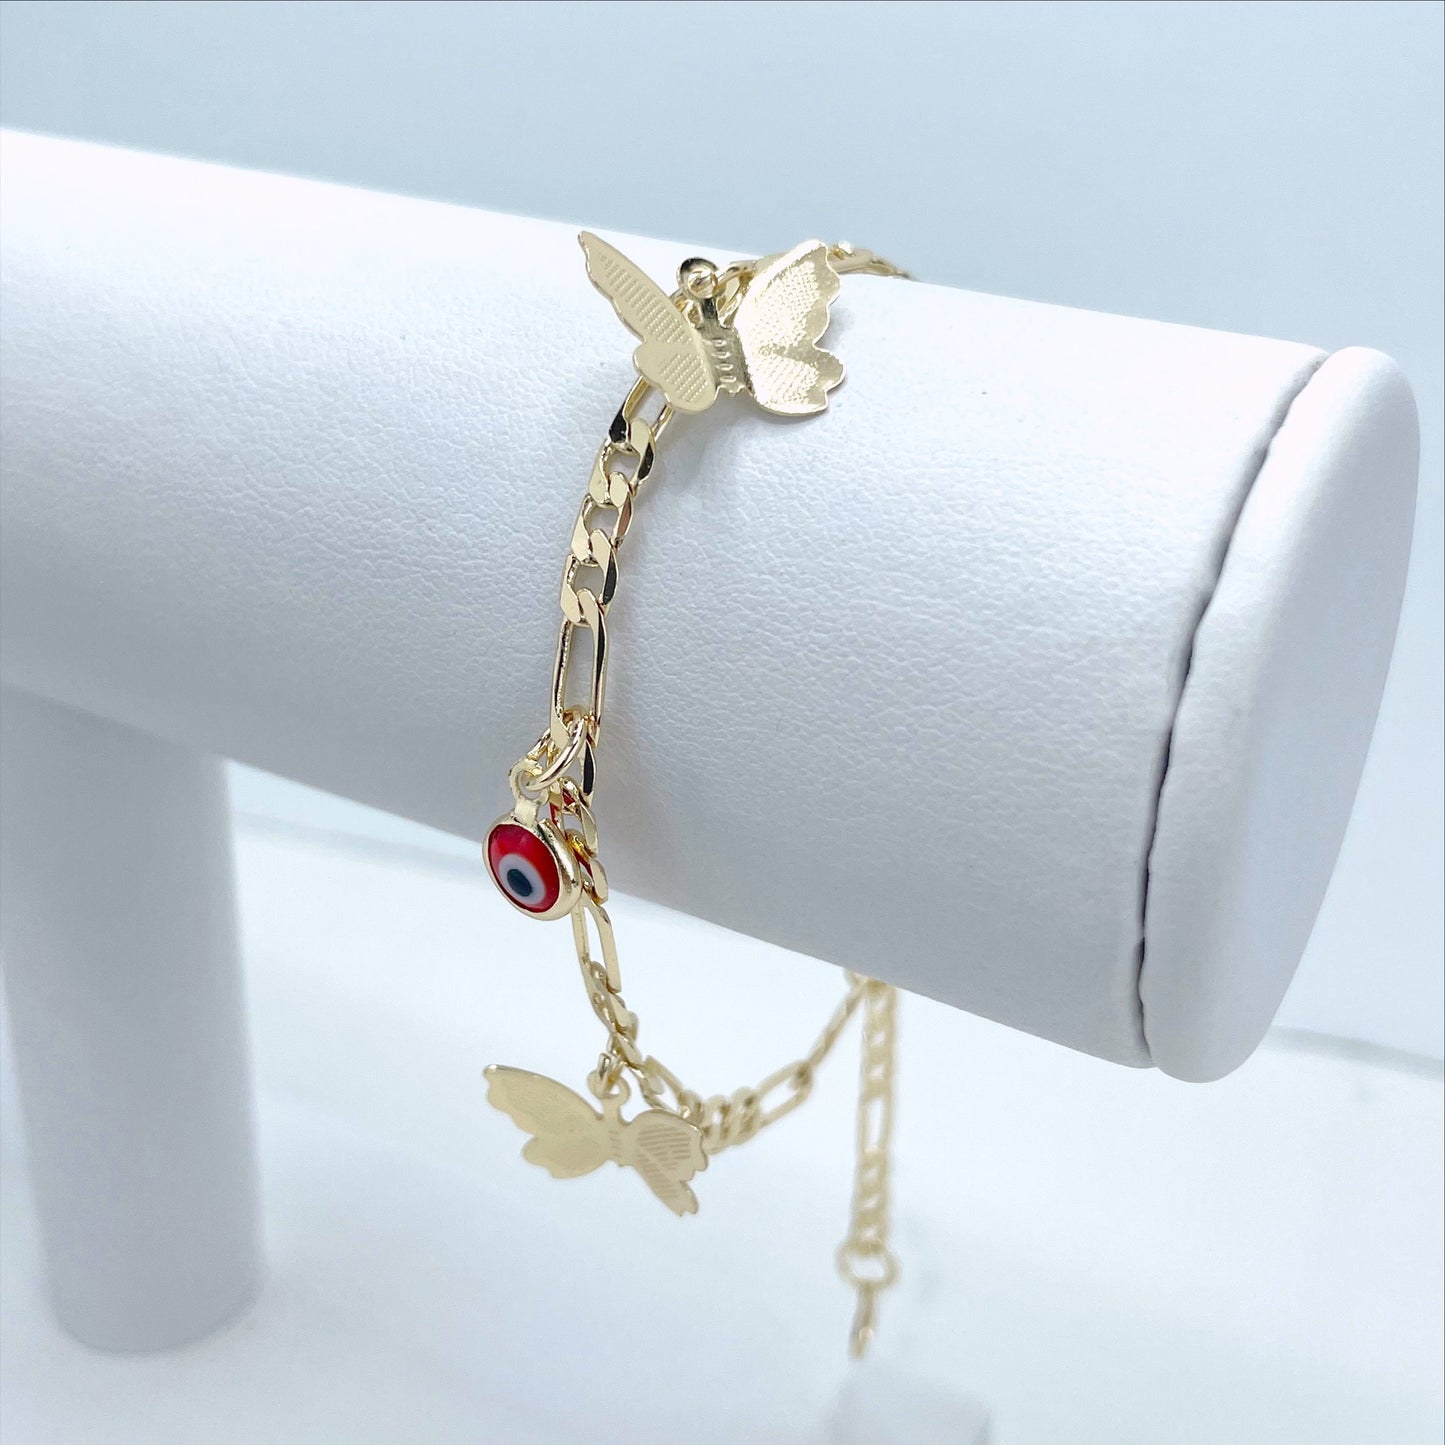 18k Gold Filled Set with Necklace, Earrings & Bracelet, 4mm Figaro Chain, Red Evil Eyes and Butterflies Shape Charms, Wholesale Jewelry